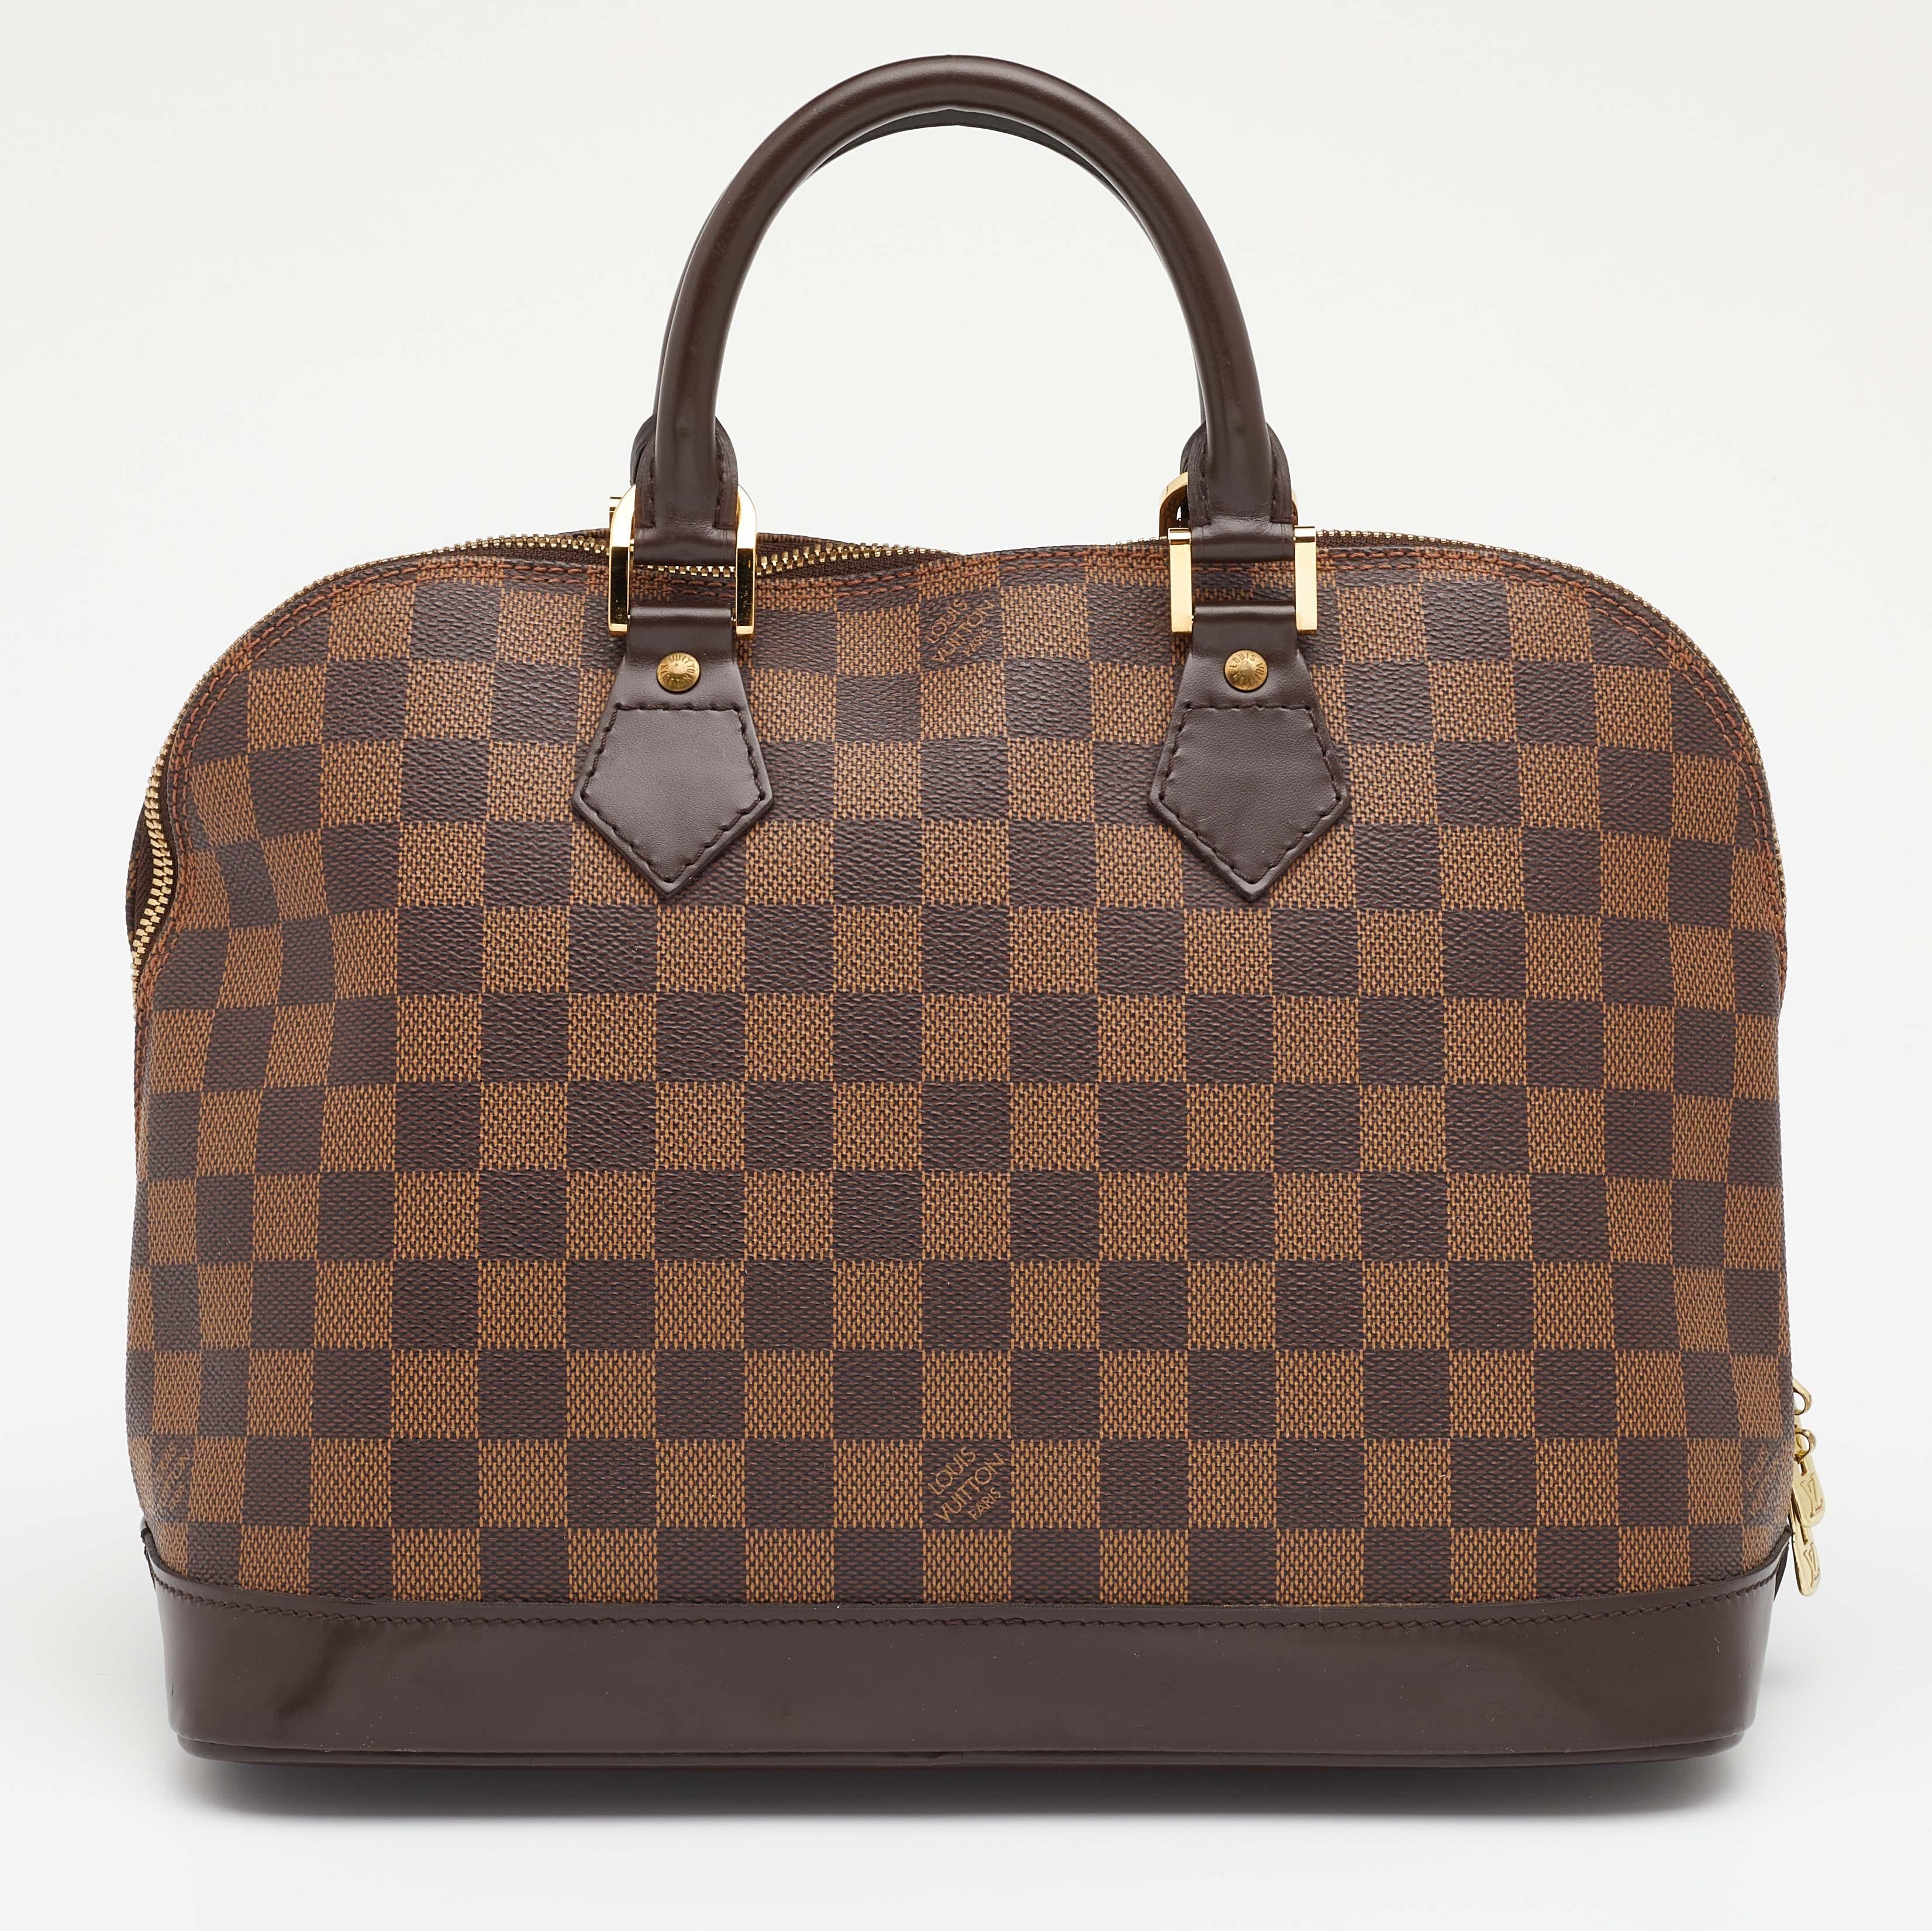 Out of all the irresistible handbags from Louis Vuitton, the Alma is the most structured one. First introduced in 1934 by Gaston-Louis Vuitton, the Alma is a classic that has received love from icons. This piece comes crafted from Damier Ebene